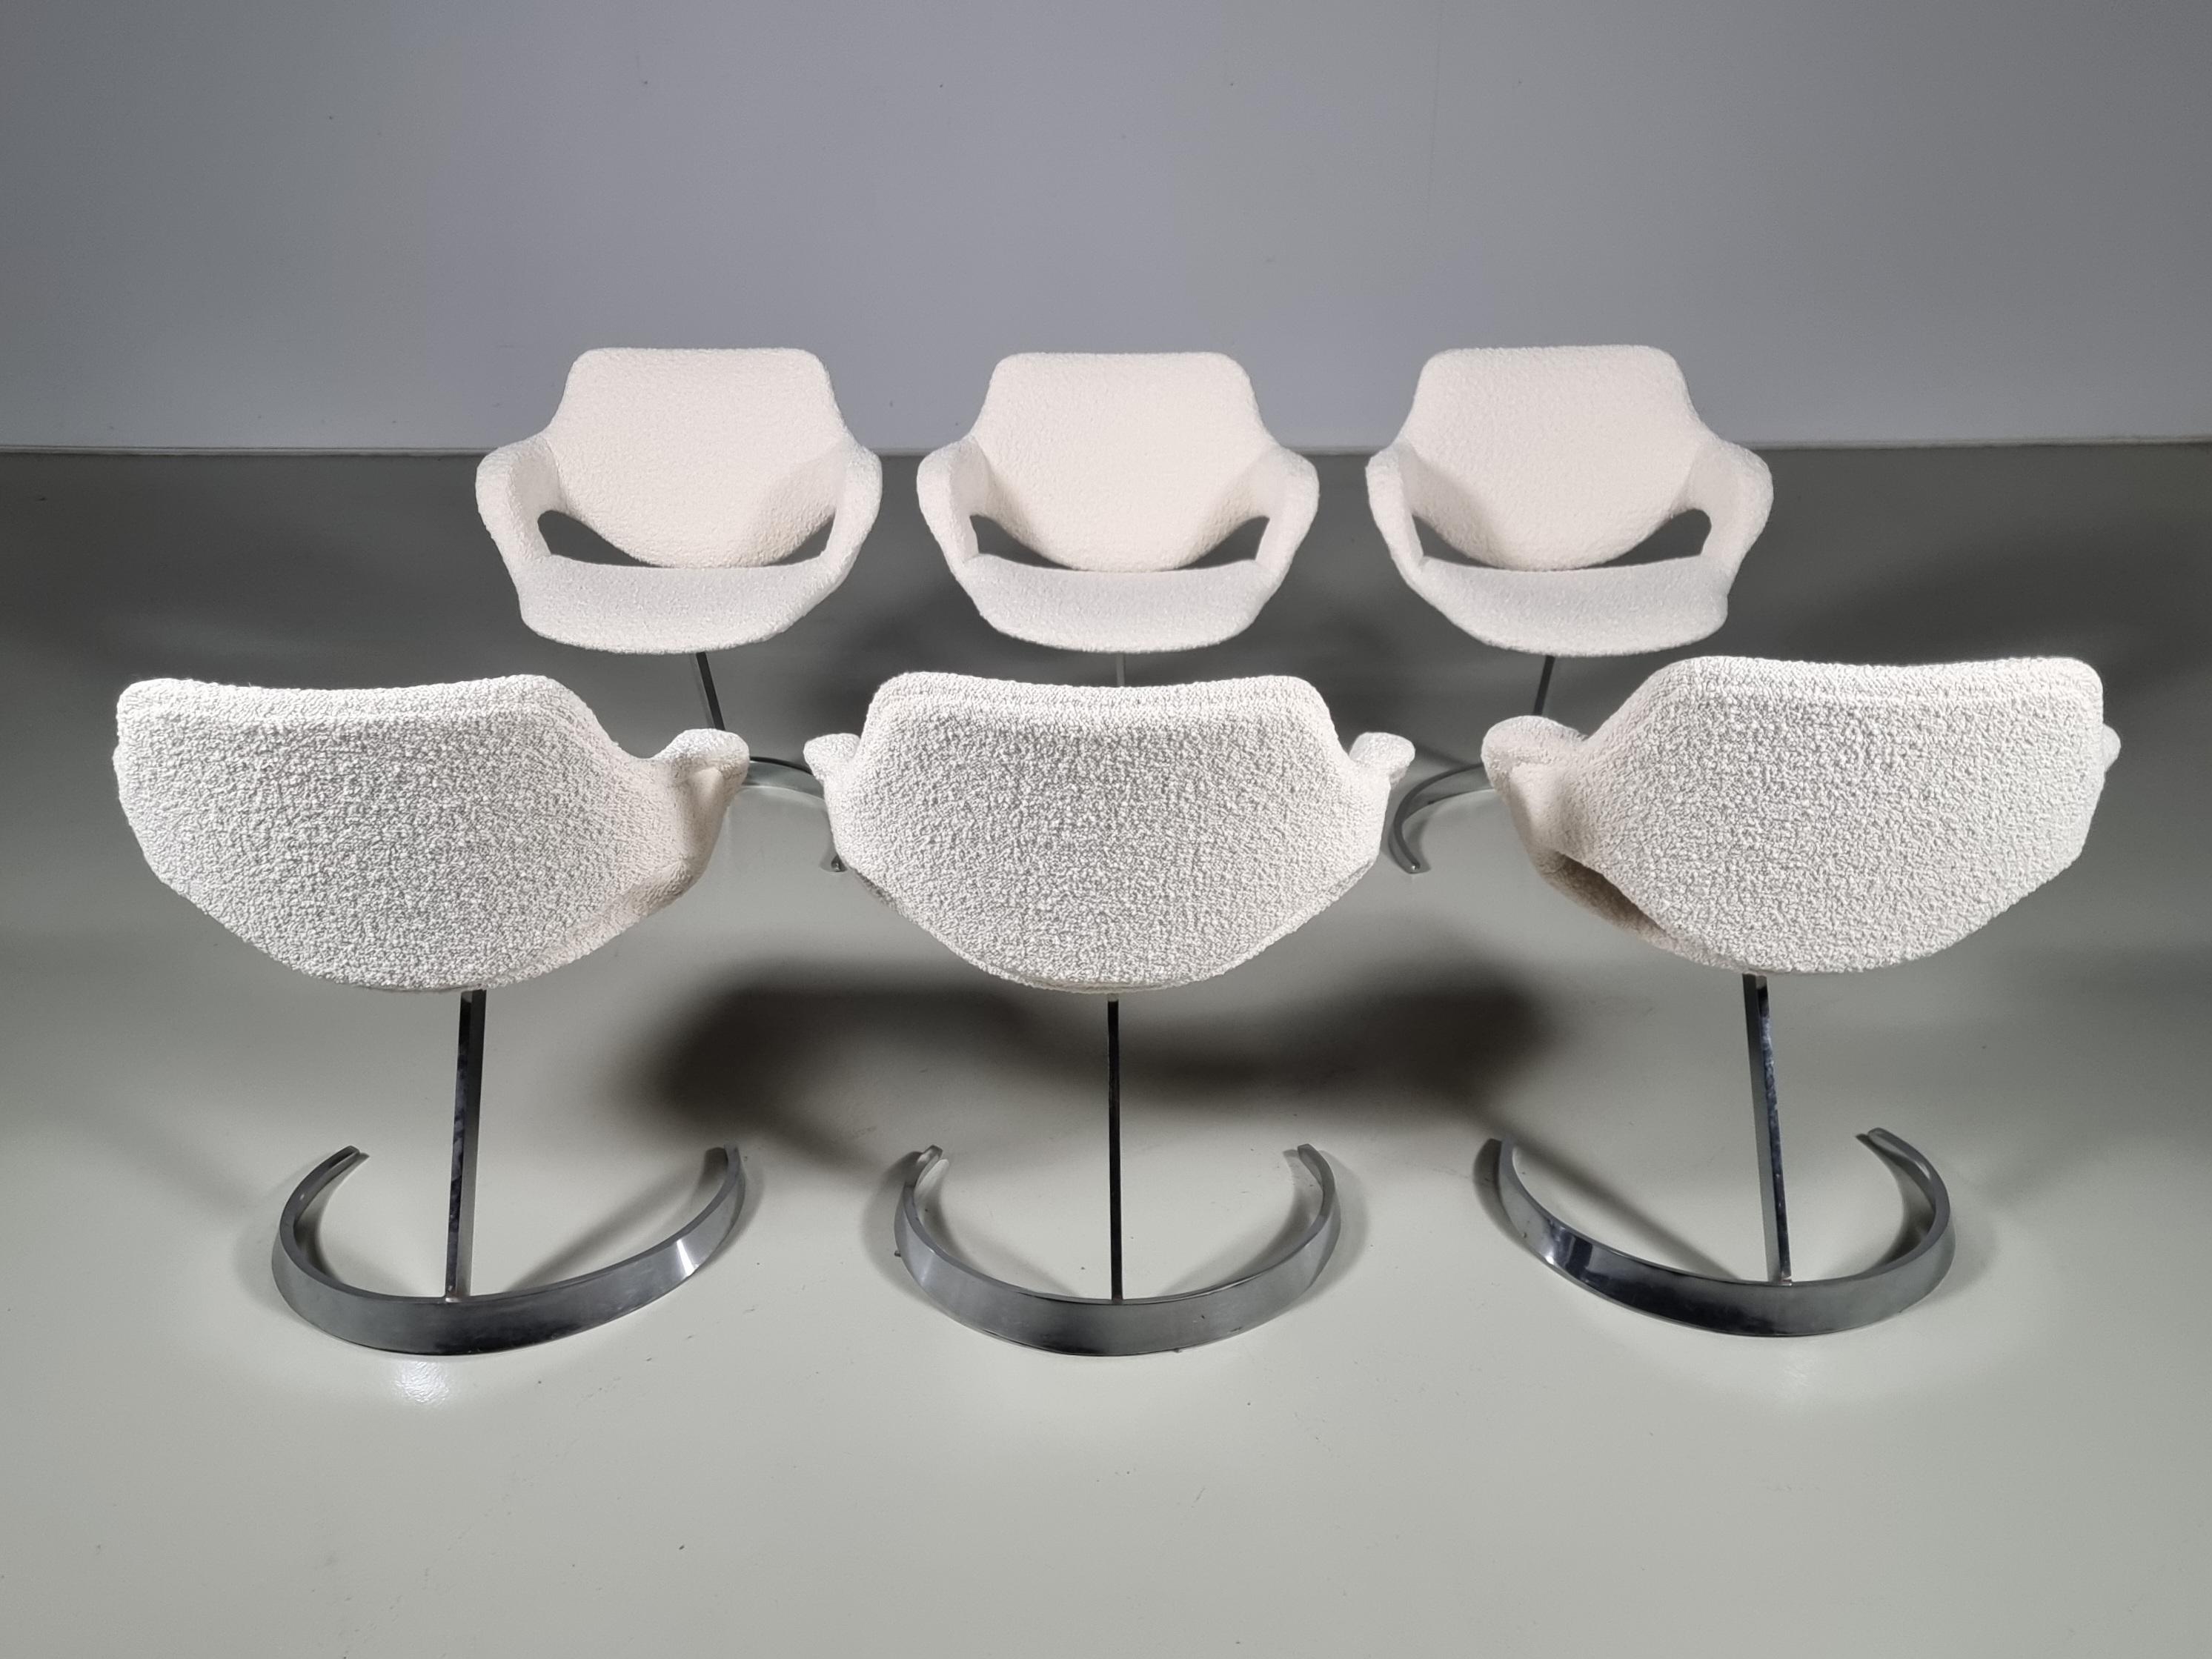 Boris Tabacoff Scimitar chairs for 'Mobilier Modulaire Moderne' (MMM), France, 1960s.

Boris Tabacoff is well known for his futuristic-looking pieces during the 1960s. These 'Scimitar